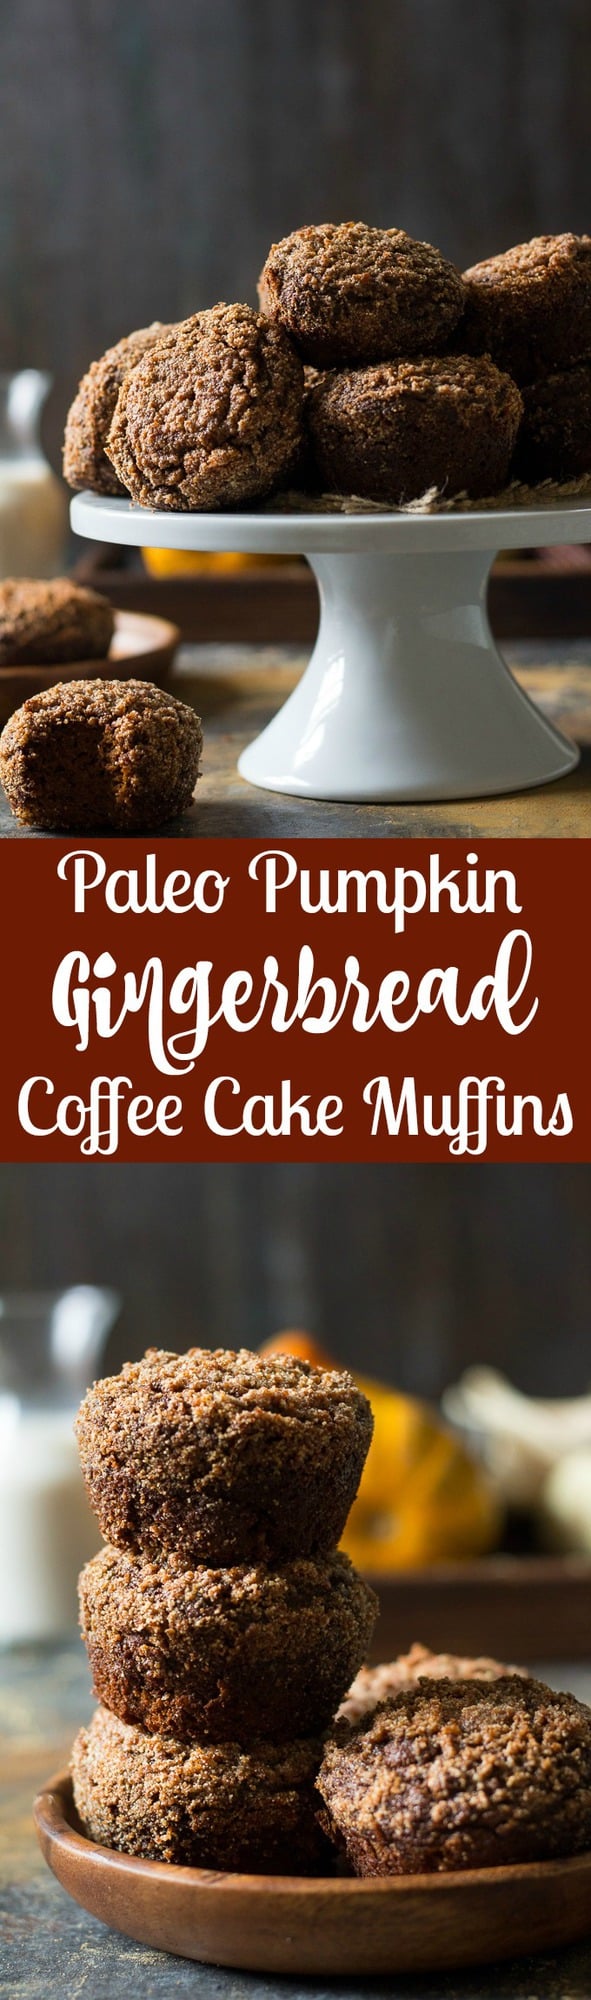 Pumpkin Gingerbread Paleo Coffee Cake Muffins - great for the holiday season or anytime for a healthy snack or dessert